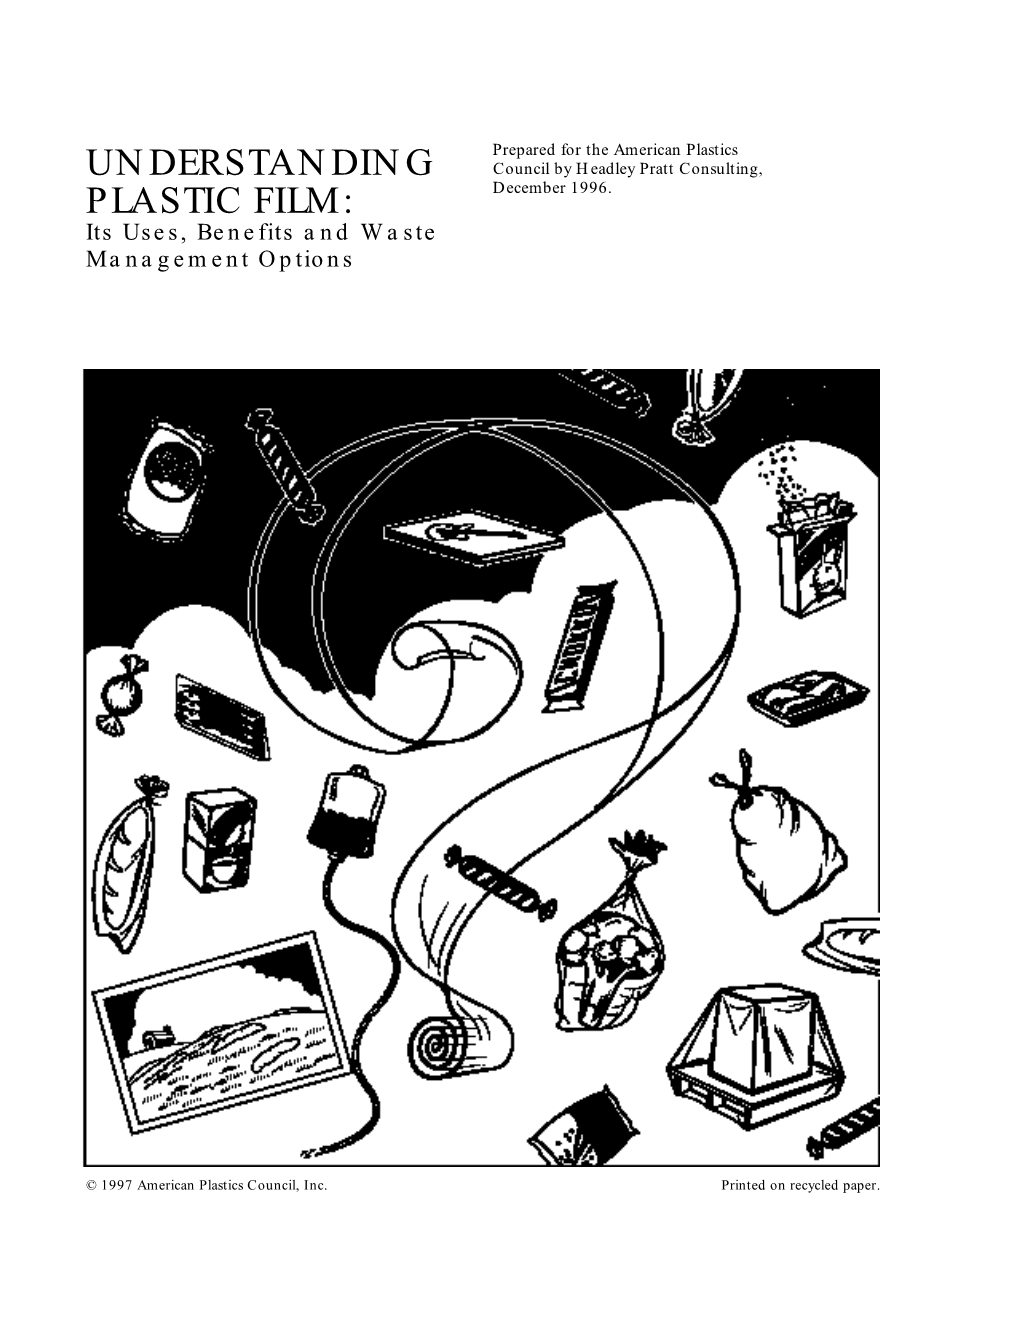 UNDERSTANDING PLASTIC FILM: Its Uses, Benefits and Waste Management Options Table of Contents